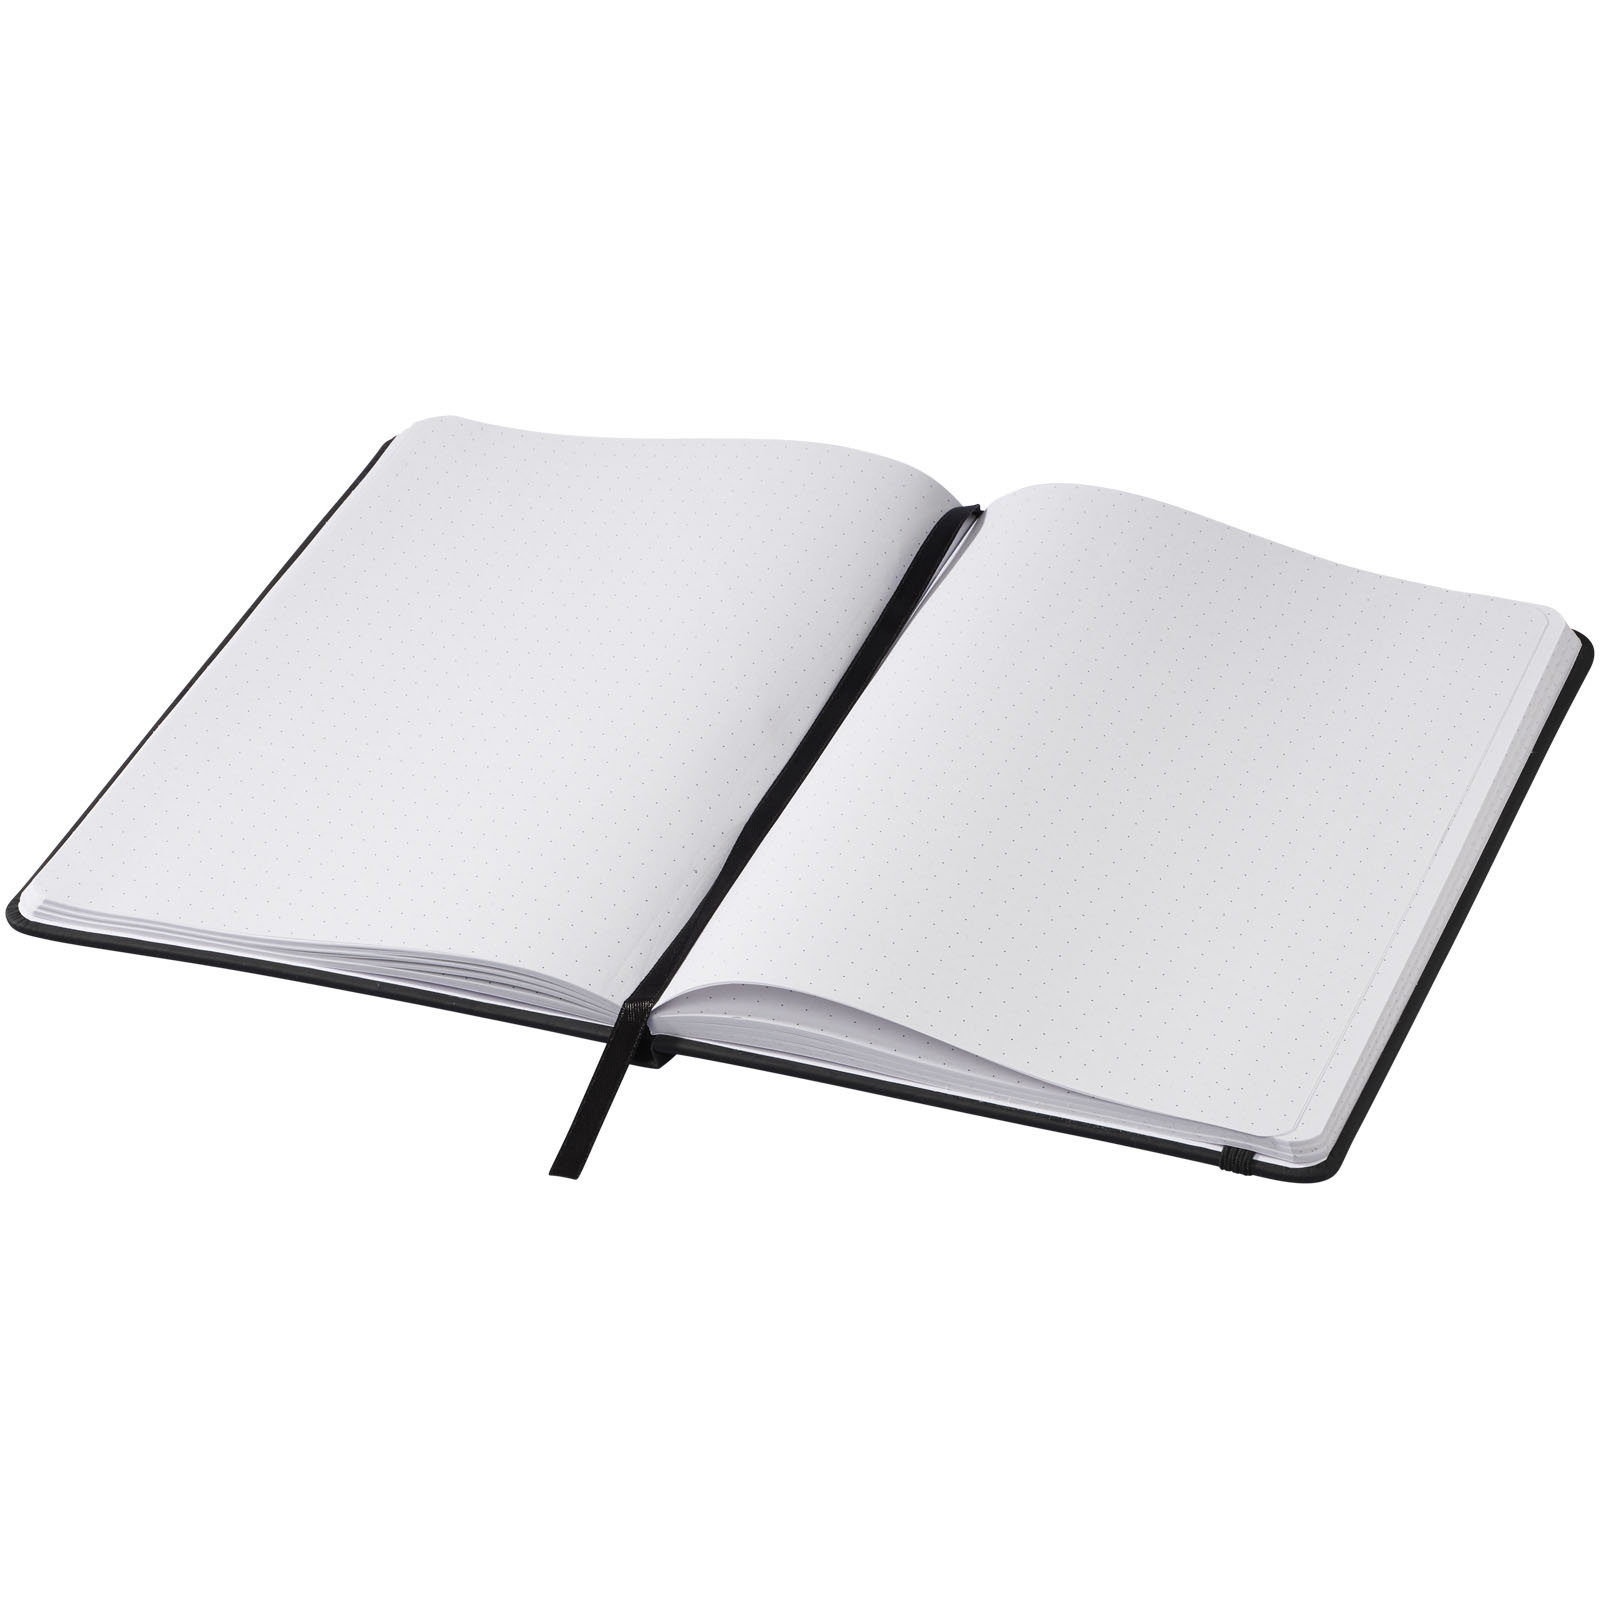 Advertising Hard cover notebooks - Spectrum A5 notebook with dotted pages - 2